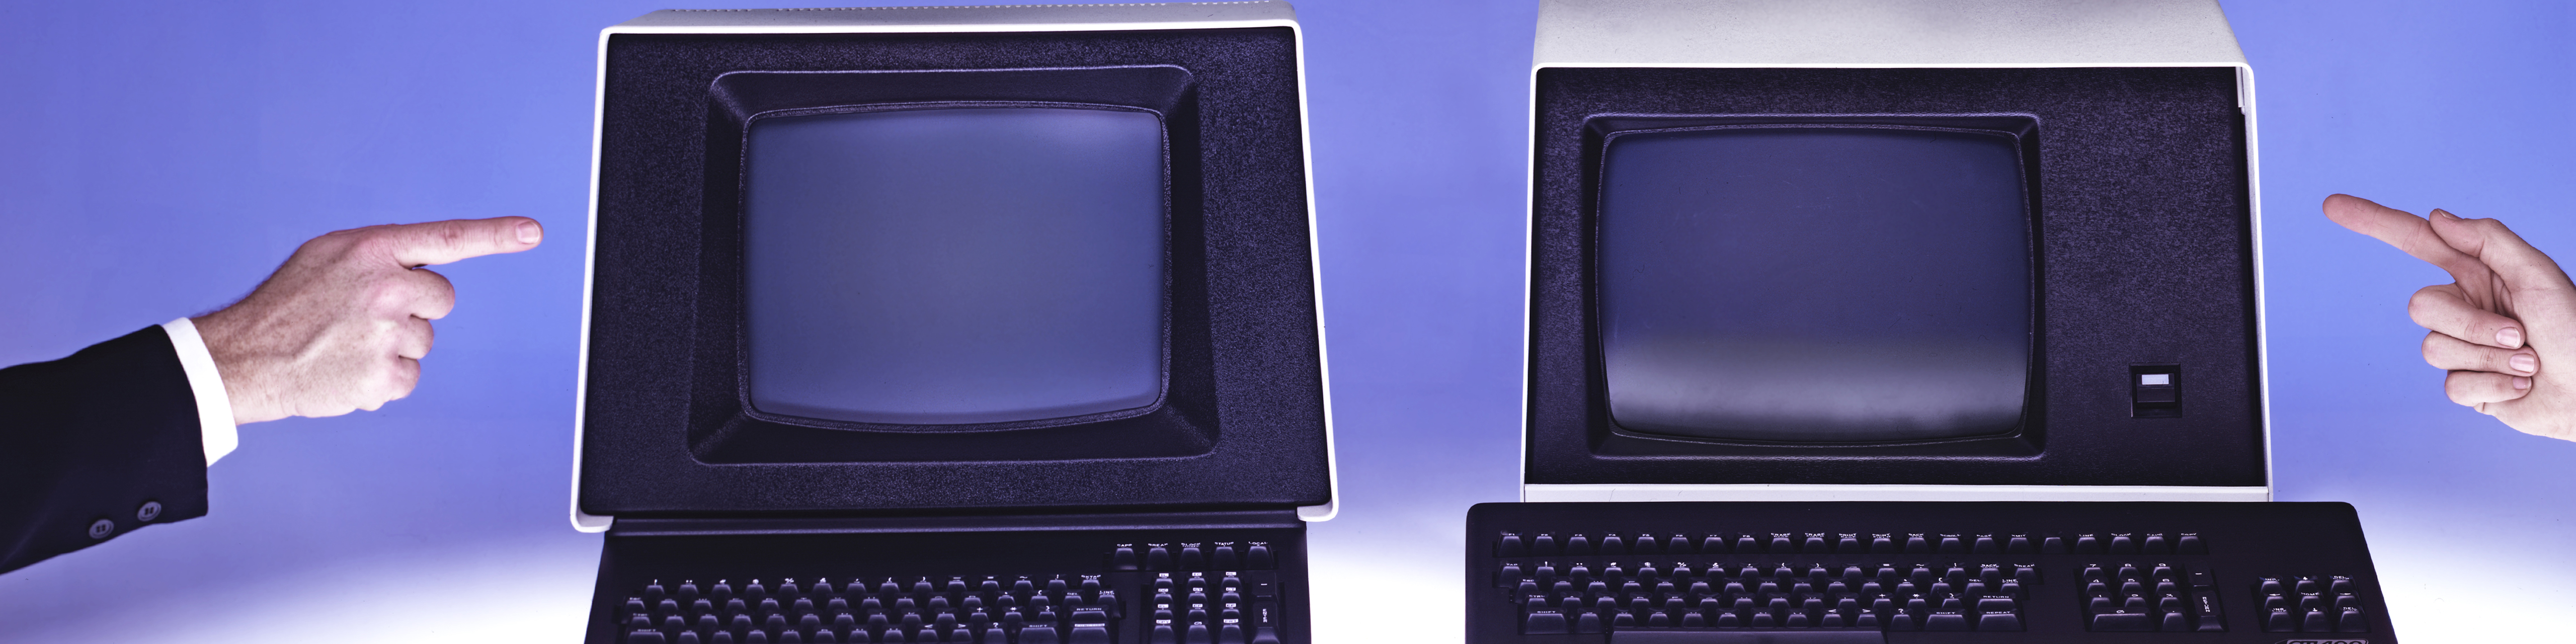 two hands pointing at two old computer terminals set against a blue-purple background